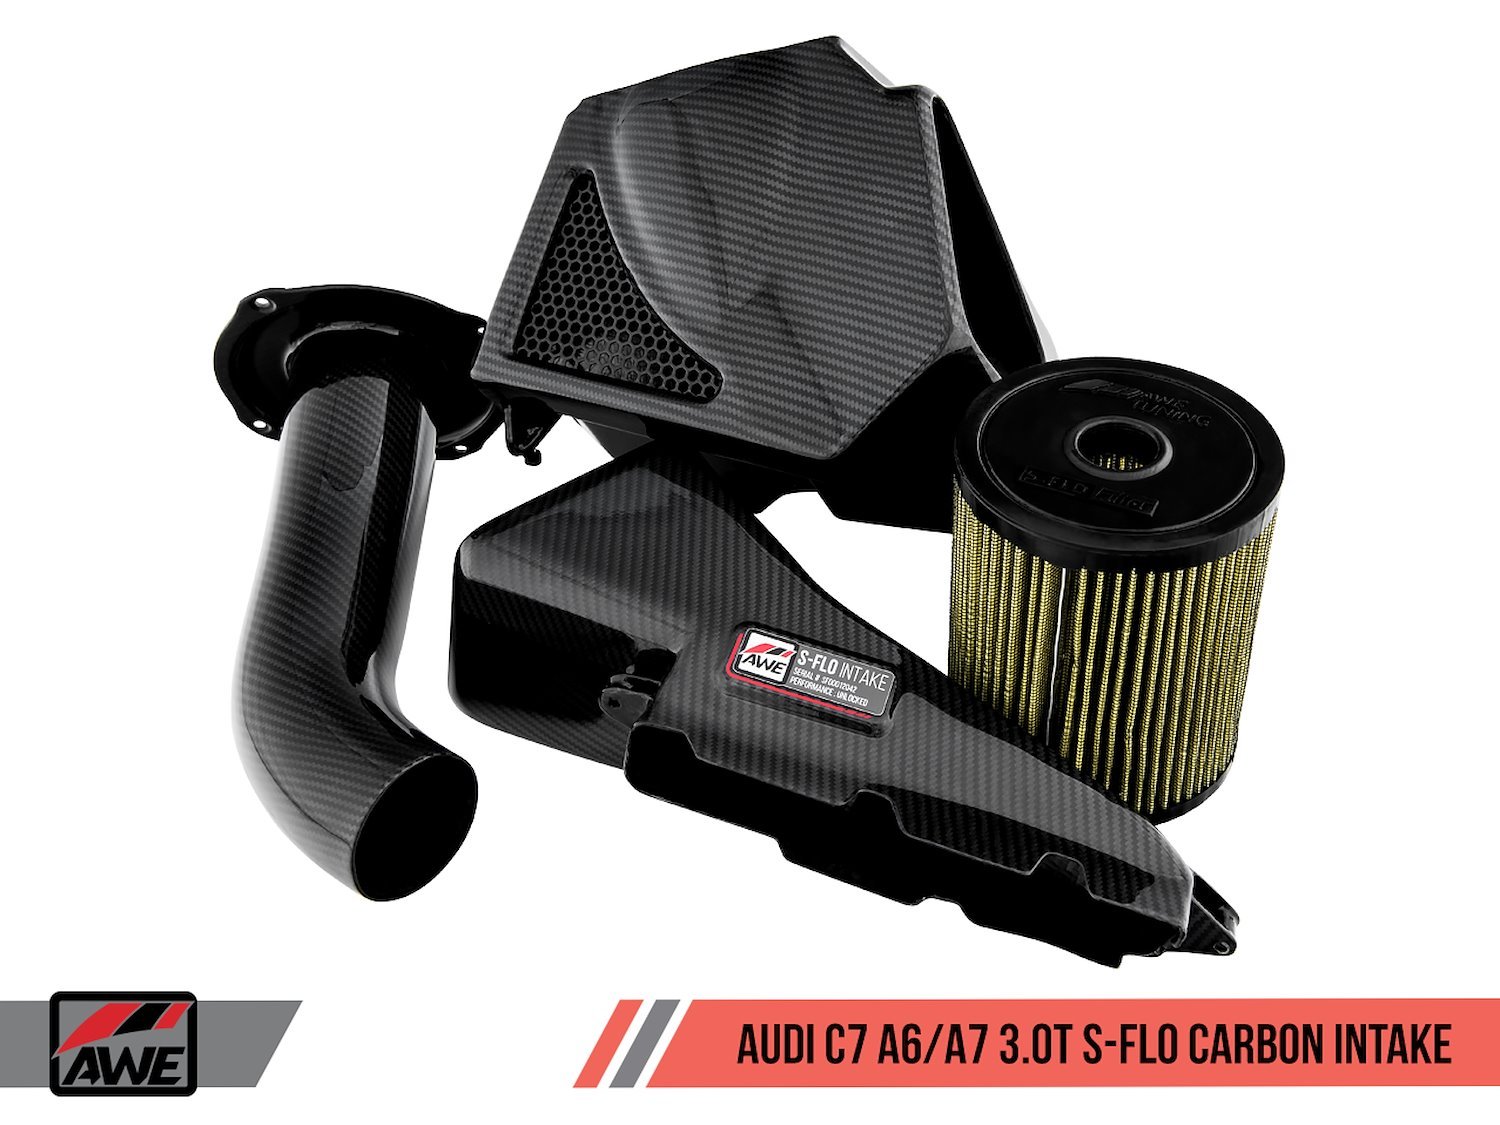 S-FLO Carbon Intake for Audi C7 A6 / A7 3.0T